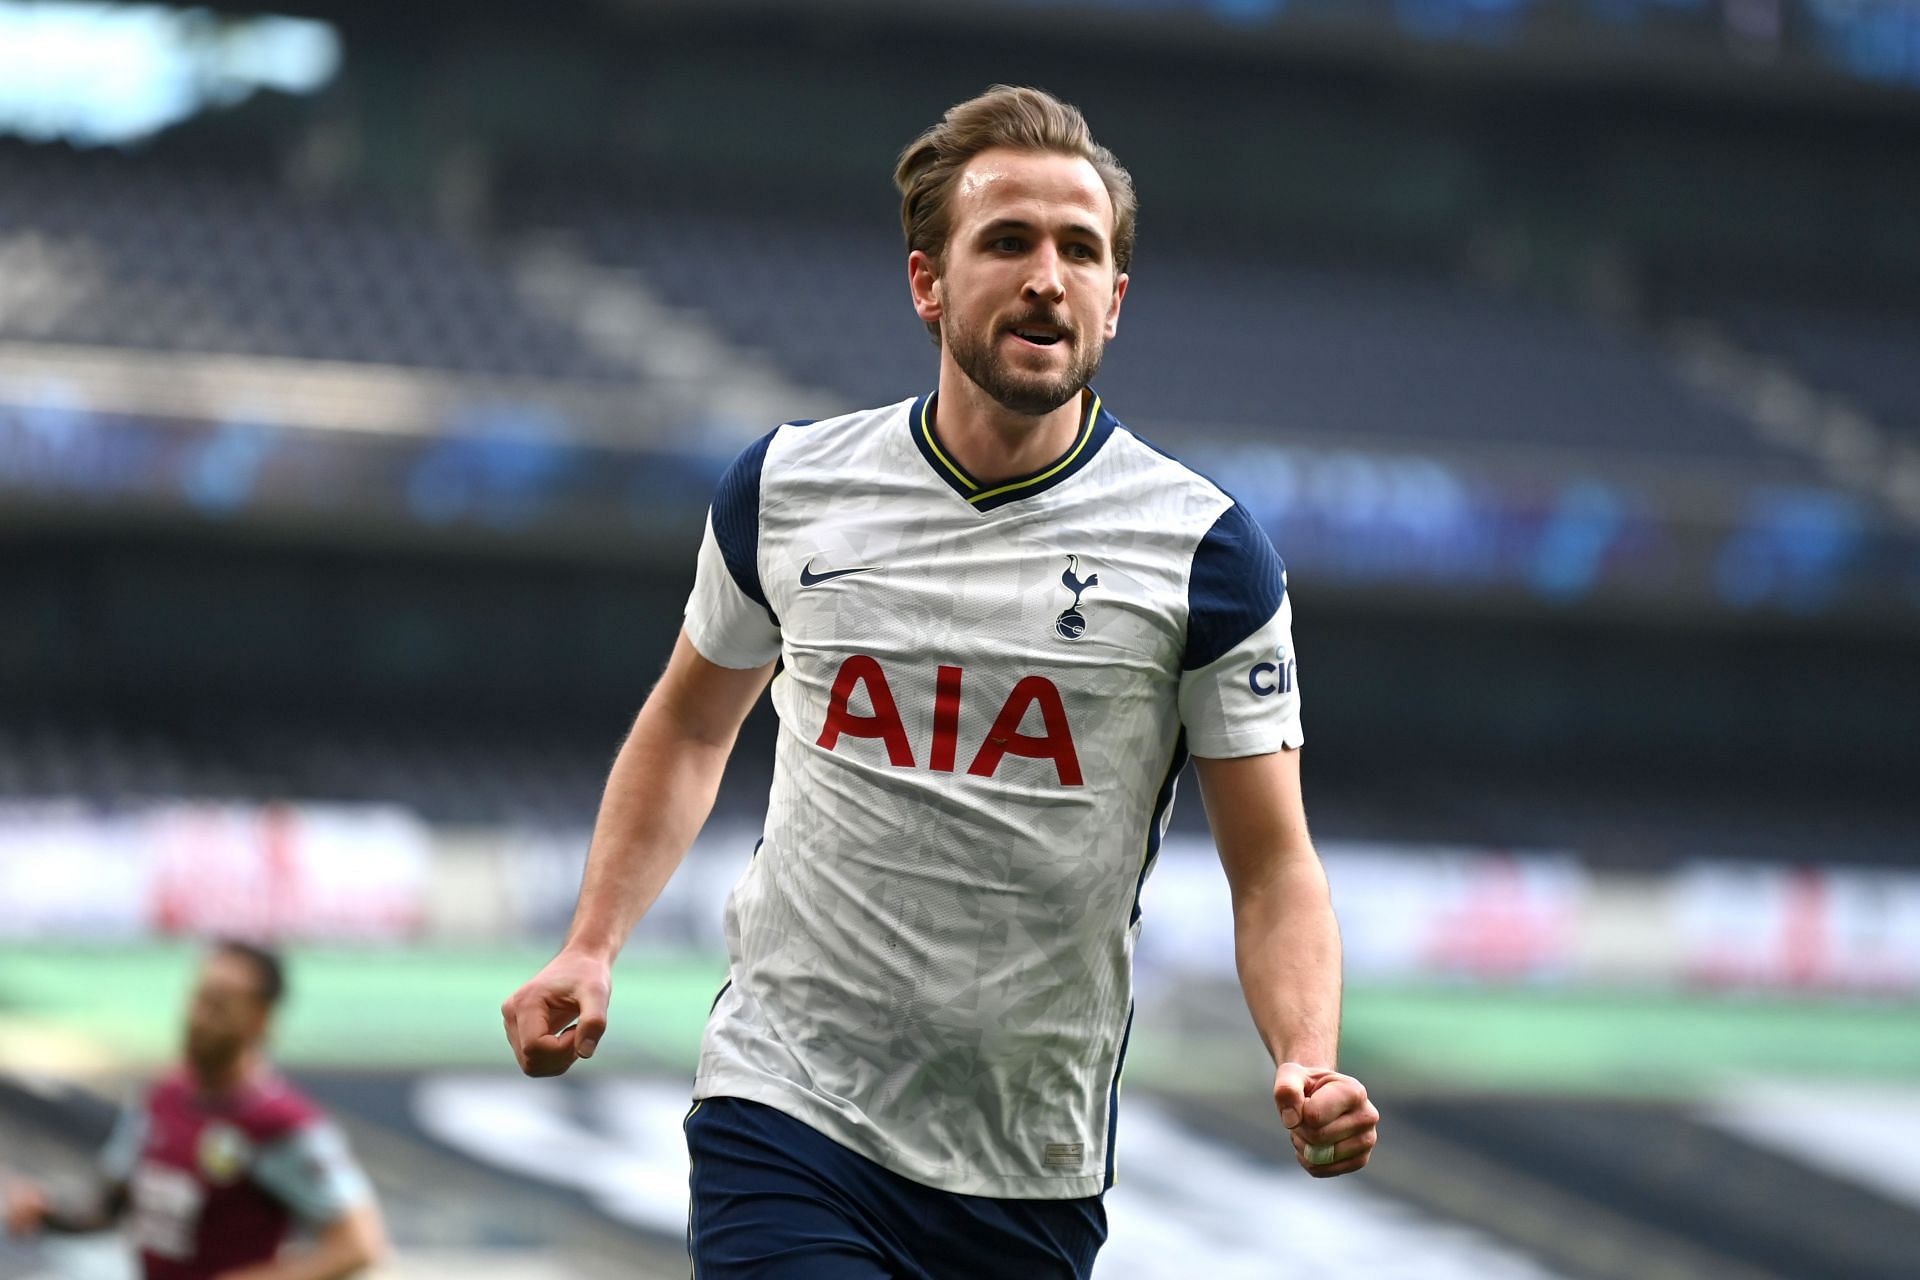 Kane was a subject of interest from Manchester City last summer